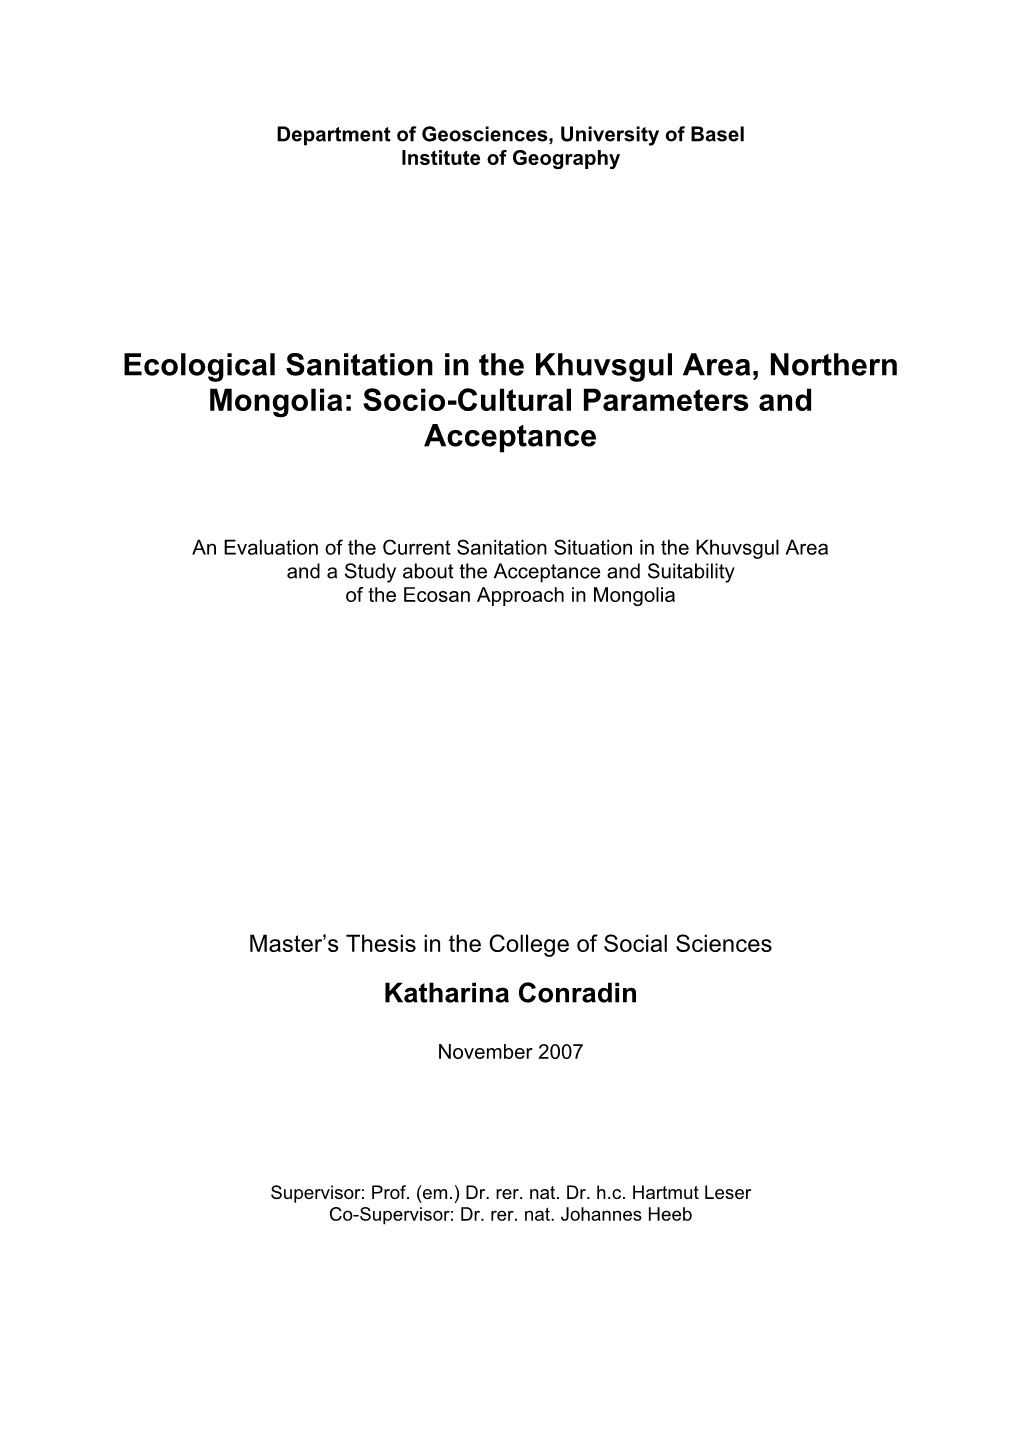 Ecological Sanitation in the Khuvsgul Area, Northern Mongolia: Socio-Cultural Parameters and Acceptance